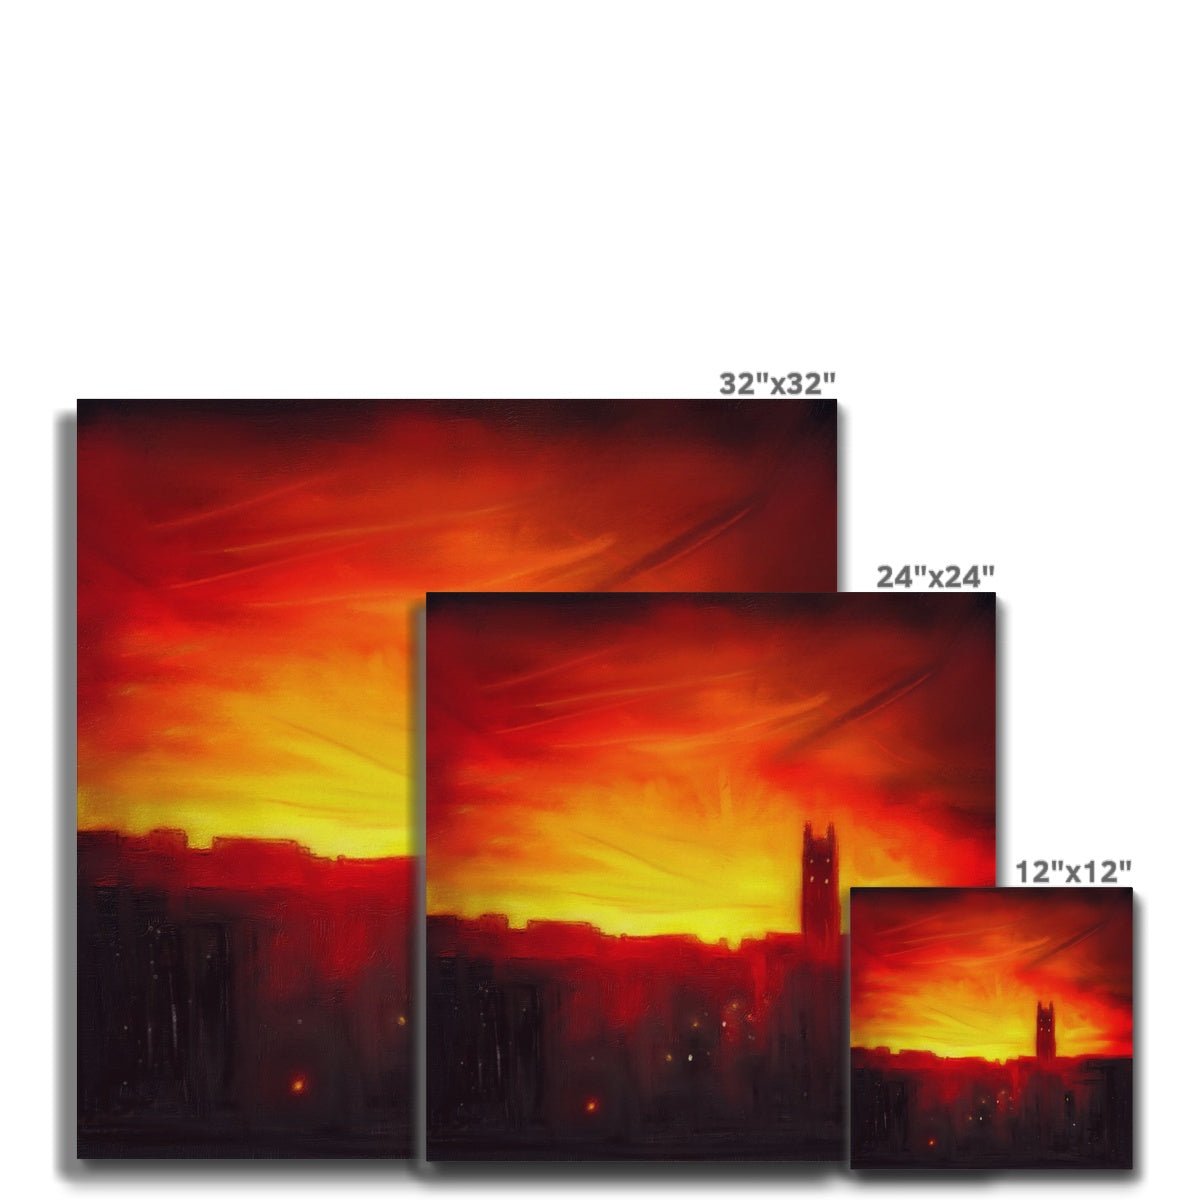 St Stephen's Church Sunset Painting | Canvas From Scotland-Contemporary Stretched Canvas Prints-Edinburgh & Glasgow Art Gallery-Paintings, Prints, Homeware, Art Gifts From Scotland By Scottish Artist Kevin Hunter